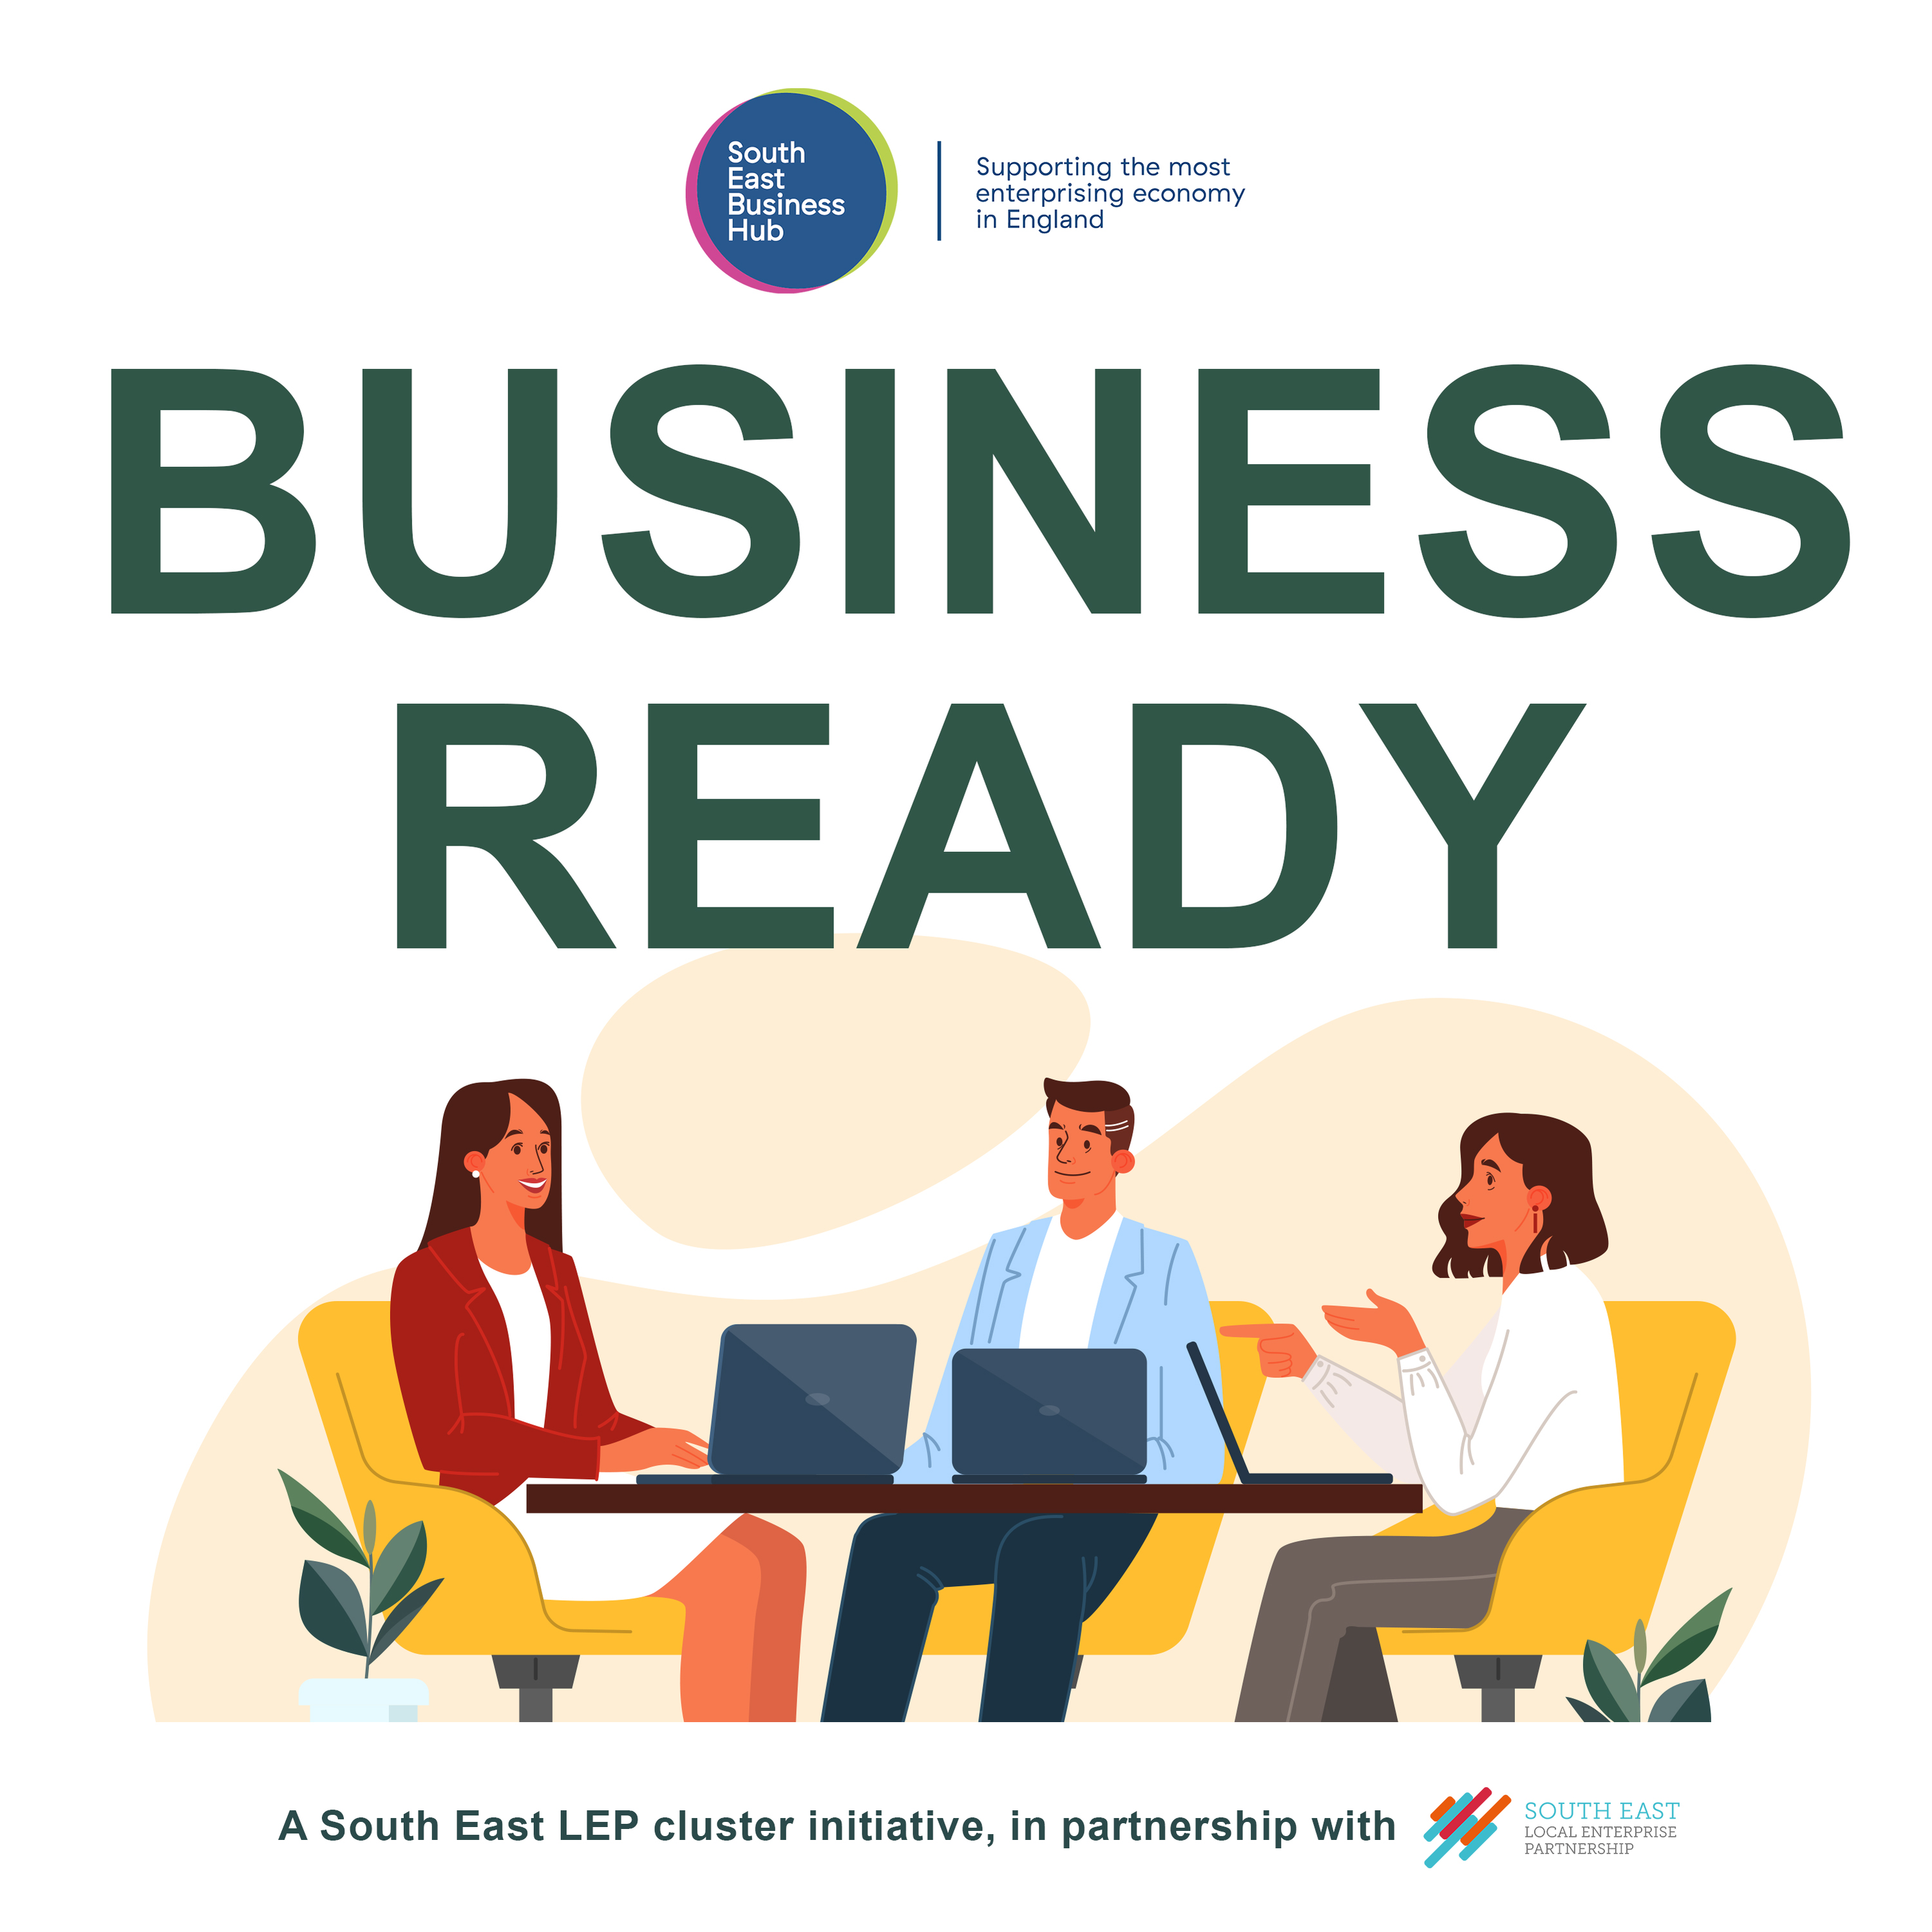 Brexit Ready - South East Business Hub Trailer